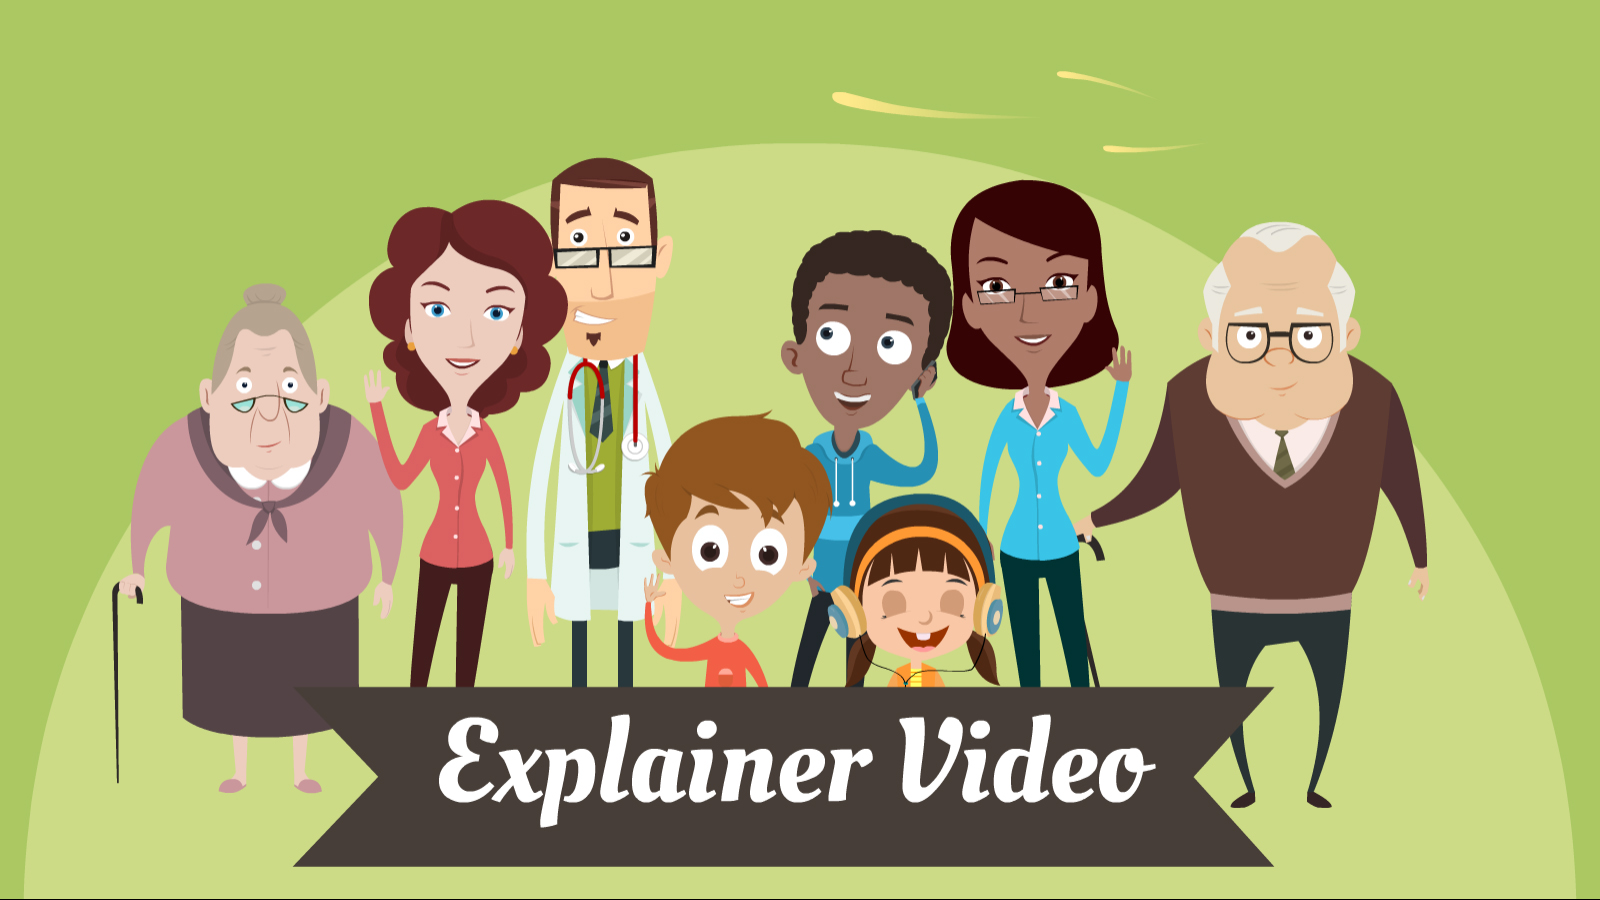 animated business video production